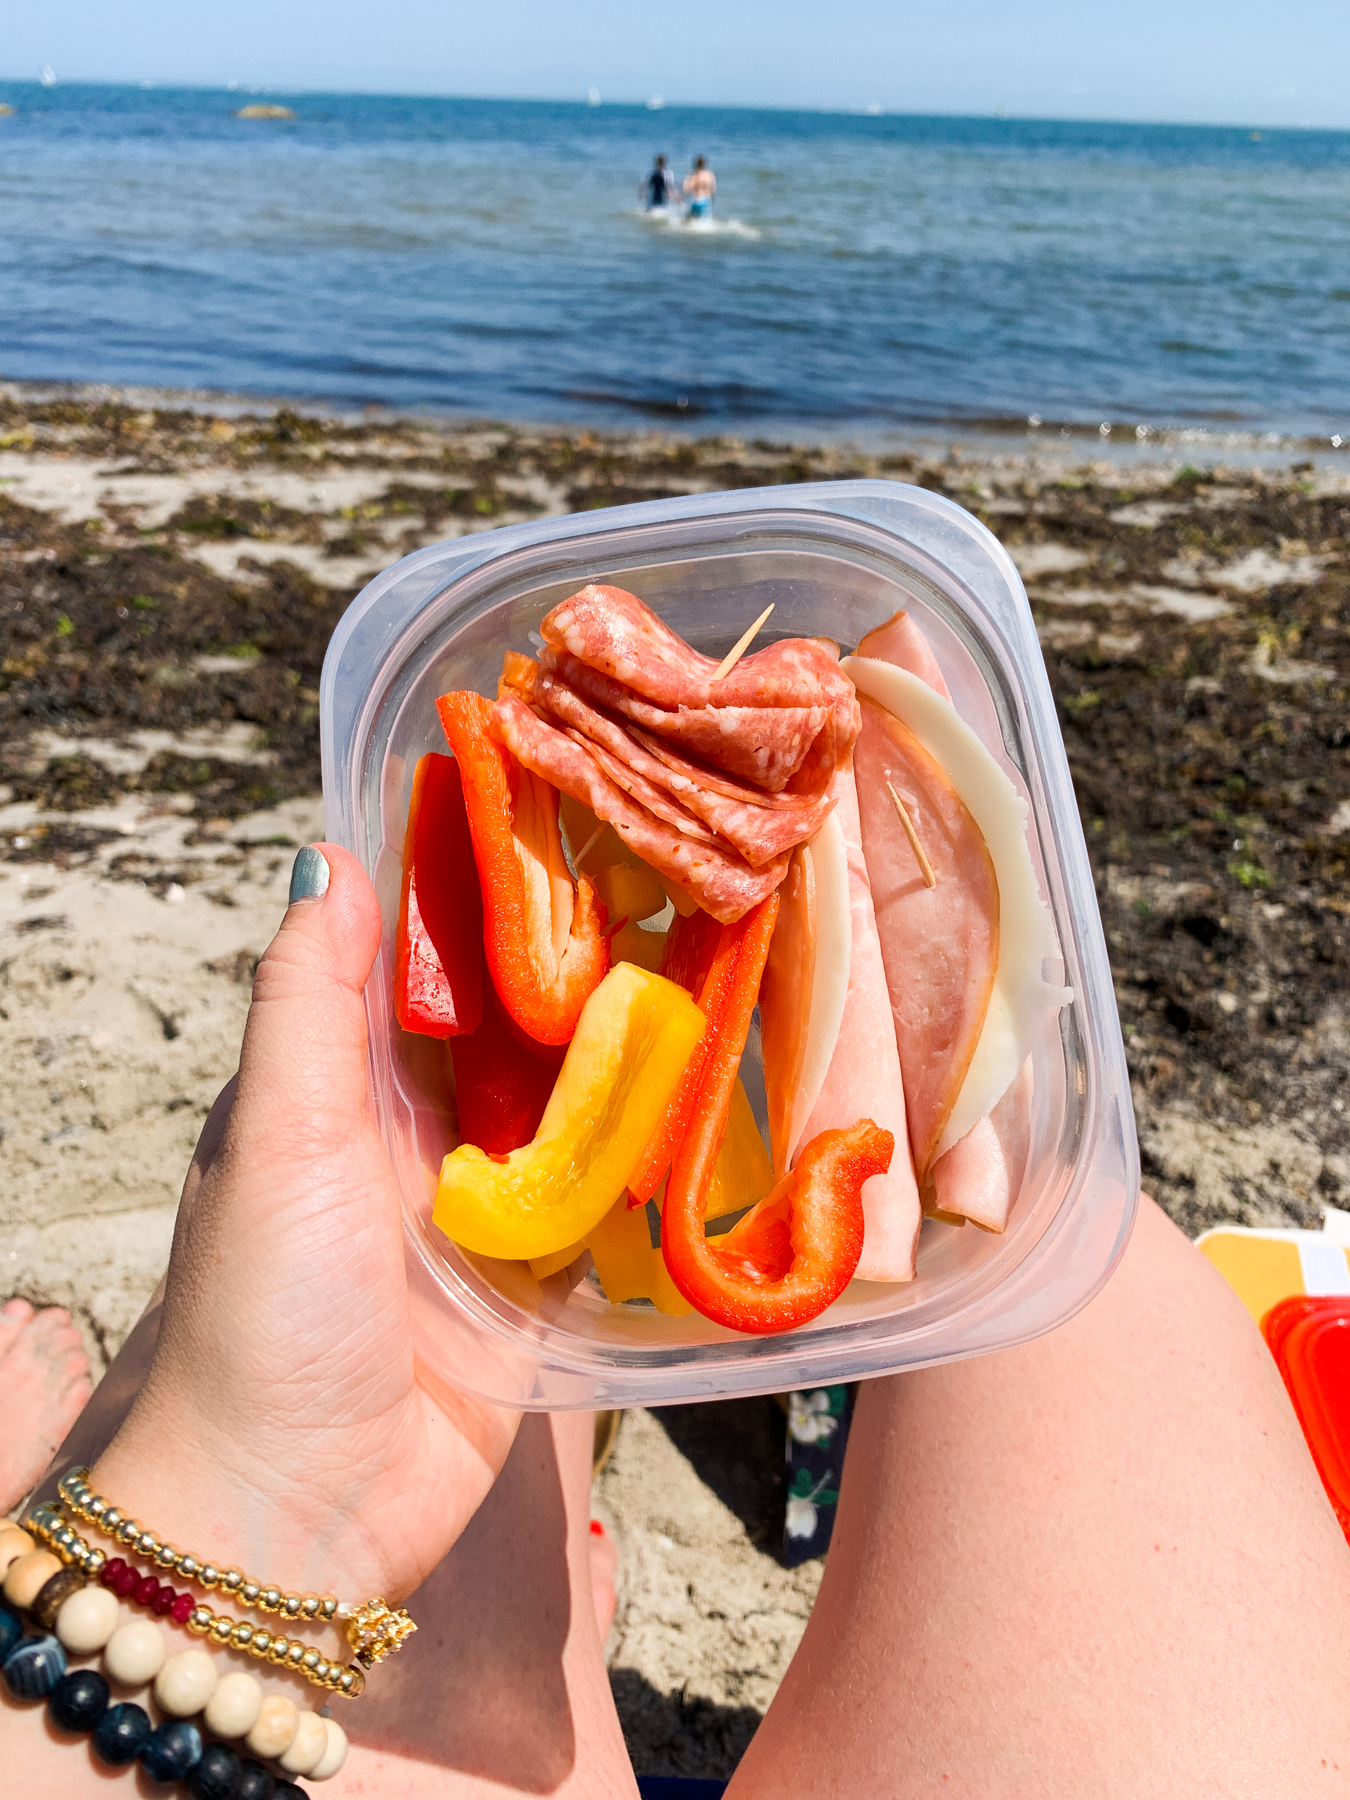 lunch snack plate on the beach with deli slices and bell peppers